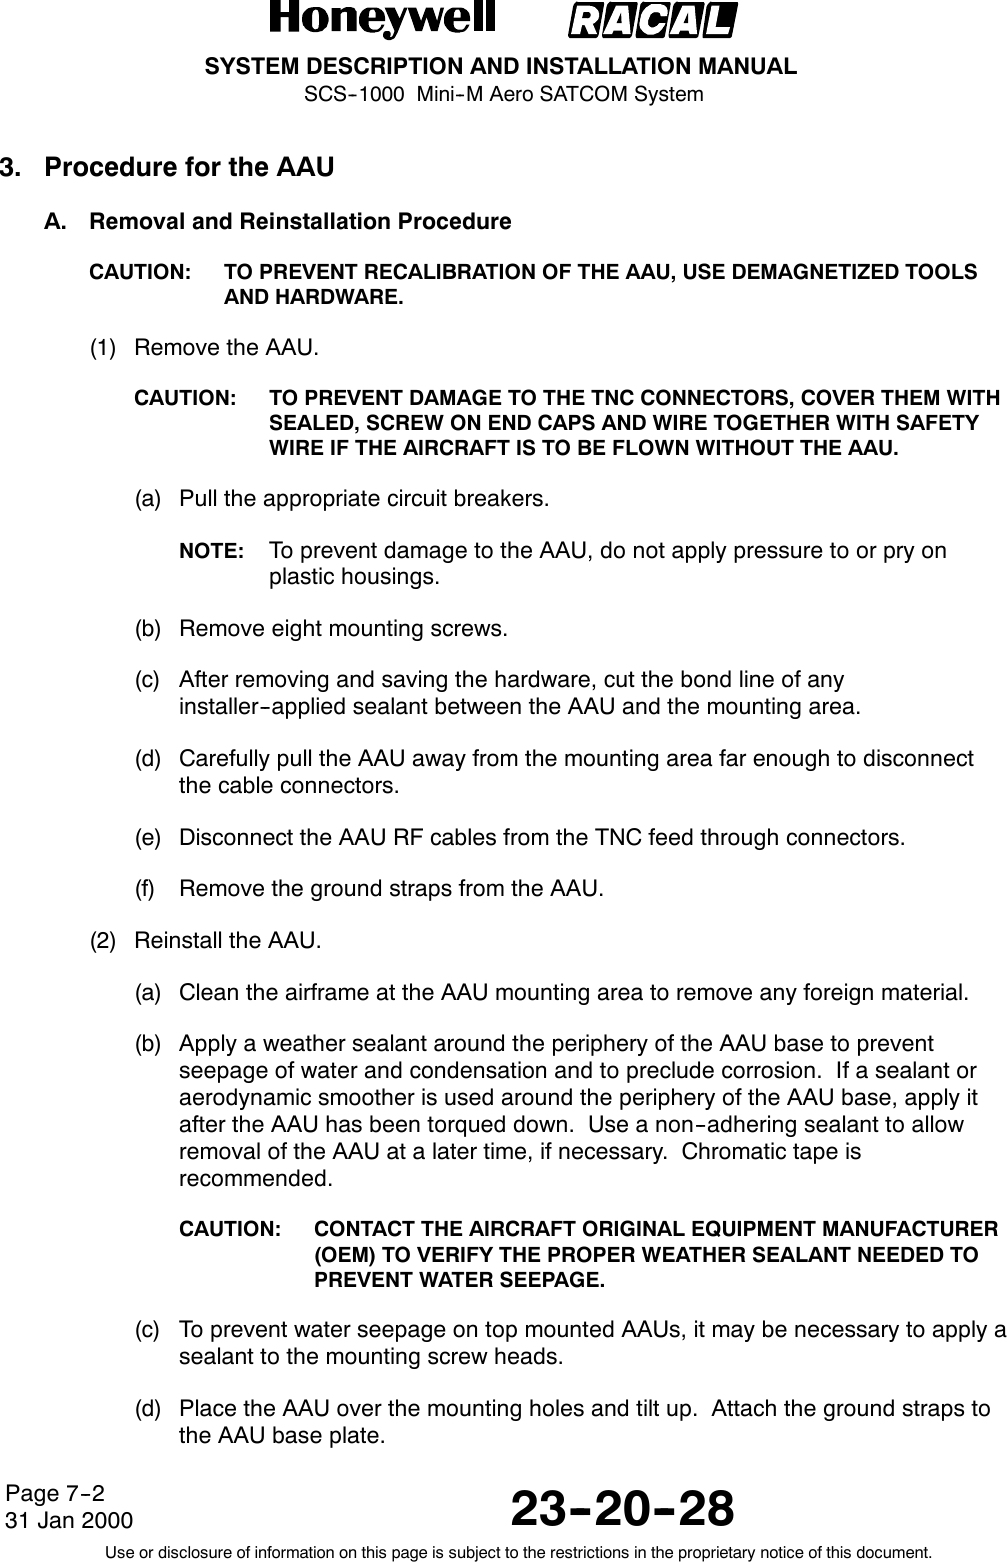 SYSTEM DESCRIPTION AND INSTALLATION MANUALSCS--1000 Mini--M Aero SATCOM System23--20--28Use or disclosure of information on this page is subject to the restrictions in the proprietary notice of this document.Page 7--231 Jan 20003. Procedure for the AAUA. Removal and Reinstallation ProcedureCAUTION: TO PREVENT RECALIBRATION OF THE AAU, USE DEMAGNETIZED TOOLSAND HARDWARE.(1) Remove the AAU.CAUTION: TO PREVENT DAMAGE TO THE TNC CONNECTORS, COVER THEM WITHSEALED, SCREW ON END CAPS AND WIRE TOGETHER WITH SAFETYWIRE IF THE AIRCRAFT IS TO BE FLOWN WITHOUT THE AAU.(a) Pull the appropriate circuit breakers.NOTE: To prevent damage to the AAU, do not apply pressure to or pry onplastic housings.(b) Remove eight mounting screws.(c) After removing and saving the hardware, cut the bond line of anyinstaller--applied sealant between the AAU and the mounting area.(d) Carefully pull the AAU away from the mounting area far enough to disconnectthe cable connectors.(e) Disconnect the AAU RF cables from the TNC feed through connectors.(f) Remove the ground straps from the AAU.(2) Reinstall the AAU.(a) Clean the airframe at the AAU mounting area to remove any foreign material.(b) Apply a weather sealant around the periphery of the AAU base to preventseepage of water and condensation and to preclude corrosion. If a sealant oraerodynamic smoother is used around the periphery of the AAU base, apply itafter the AAU has been torqued down. Use a non--adhering sealant to allowremoval of the AAU at a later time, if necessary. Chromatic tape isrecommended.CAUTION: CONTACT THE AIRCRAFT ORIGINAL EQUIPMENT MANUFACTURER(OEM) TO VERIFY THE PROPER WEATHER SEALANT NEEDED TOPREVENT WATER SEEPAGE.(c) To prevent water seepage on top mounted AAUs, it may be necessary to apply asealant to the mounting screw heads.(d) Place the AAU over the mounting holes and tilt up. Attach the ground straps tothe AAU base plate.